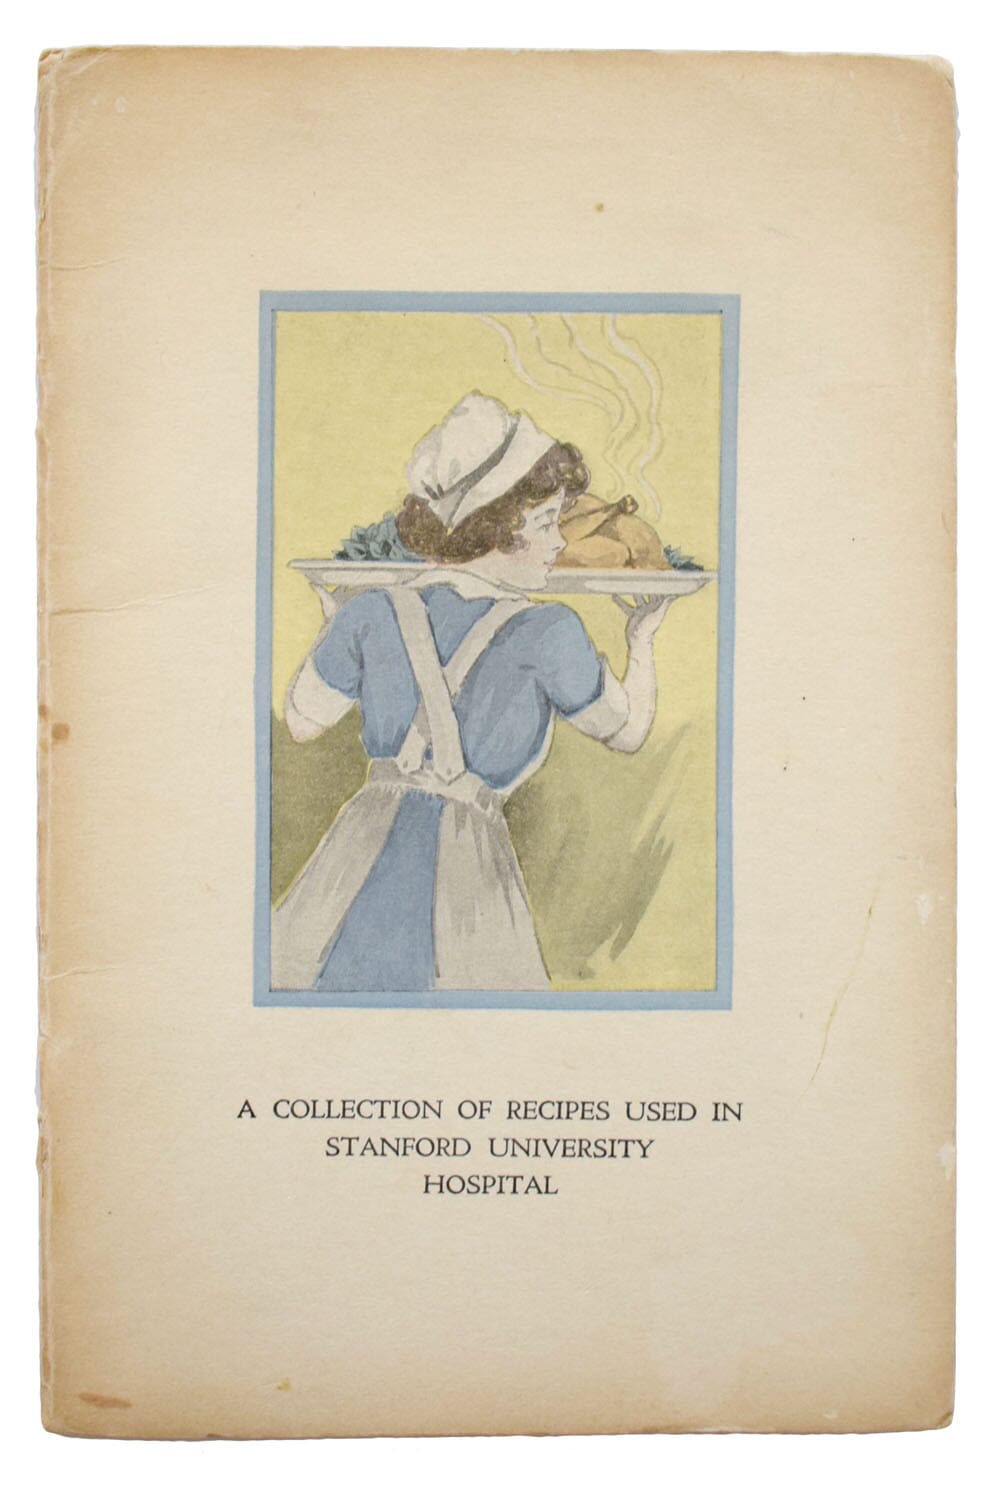 A Collection of Recipes Used in Stanford University Hospital.